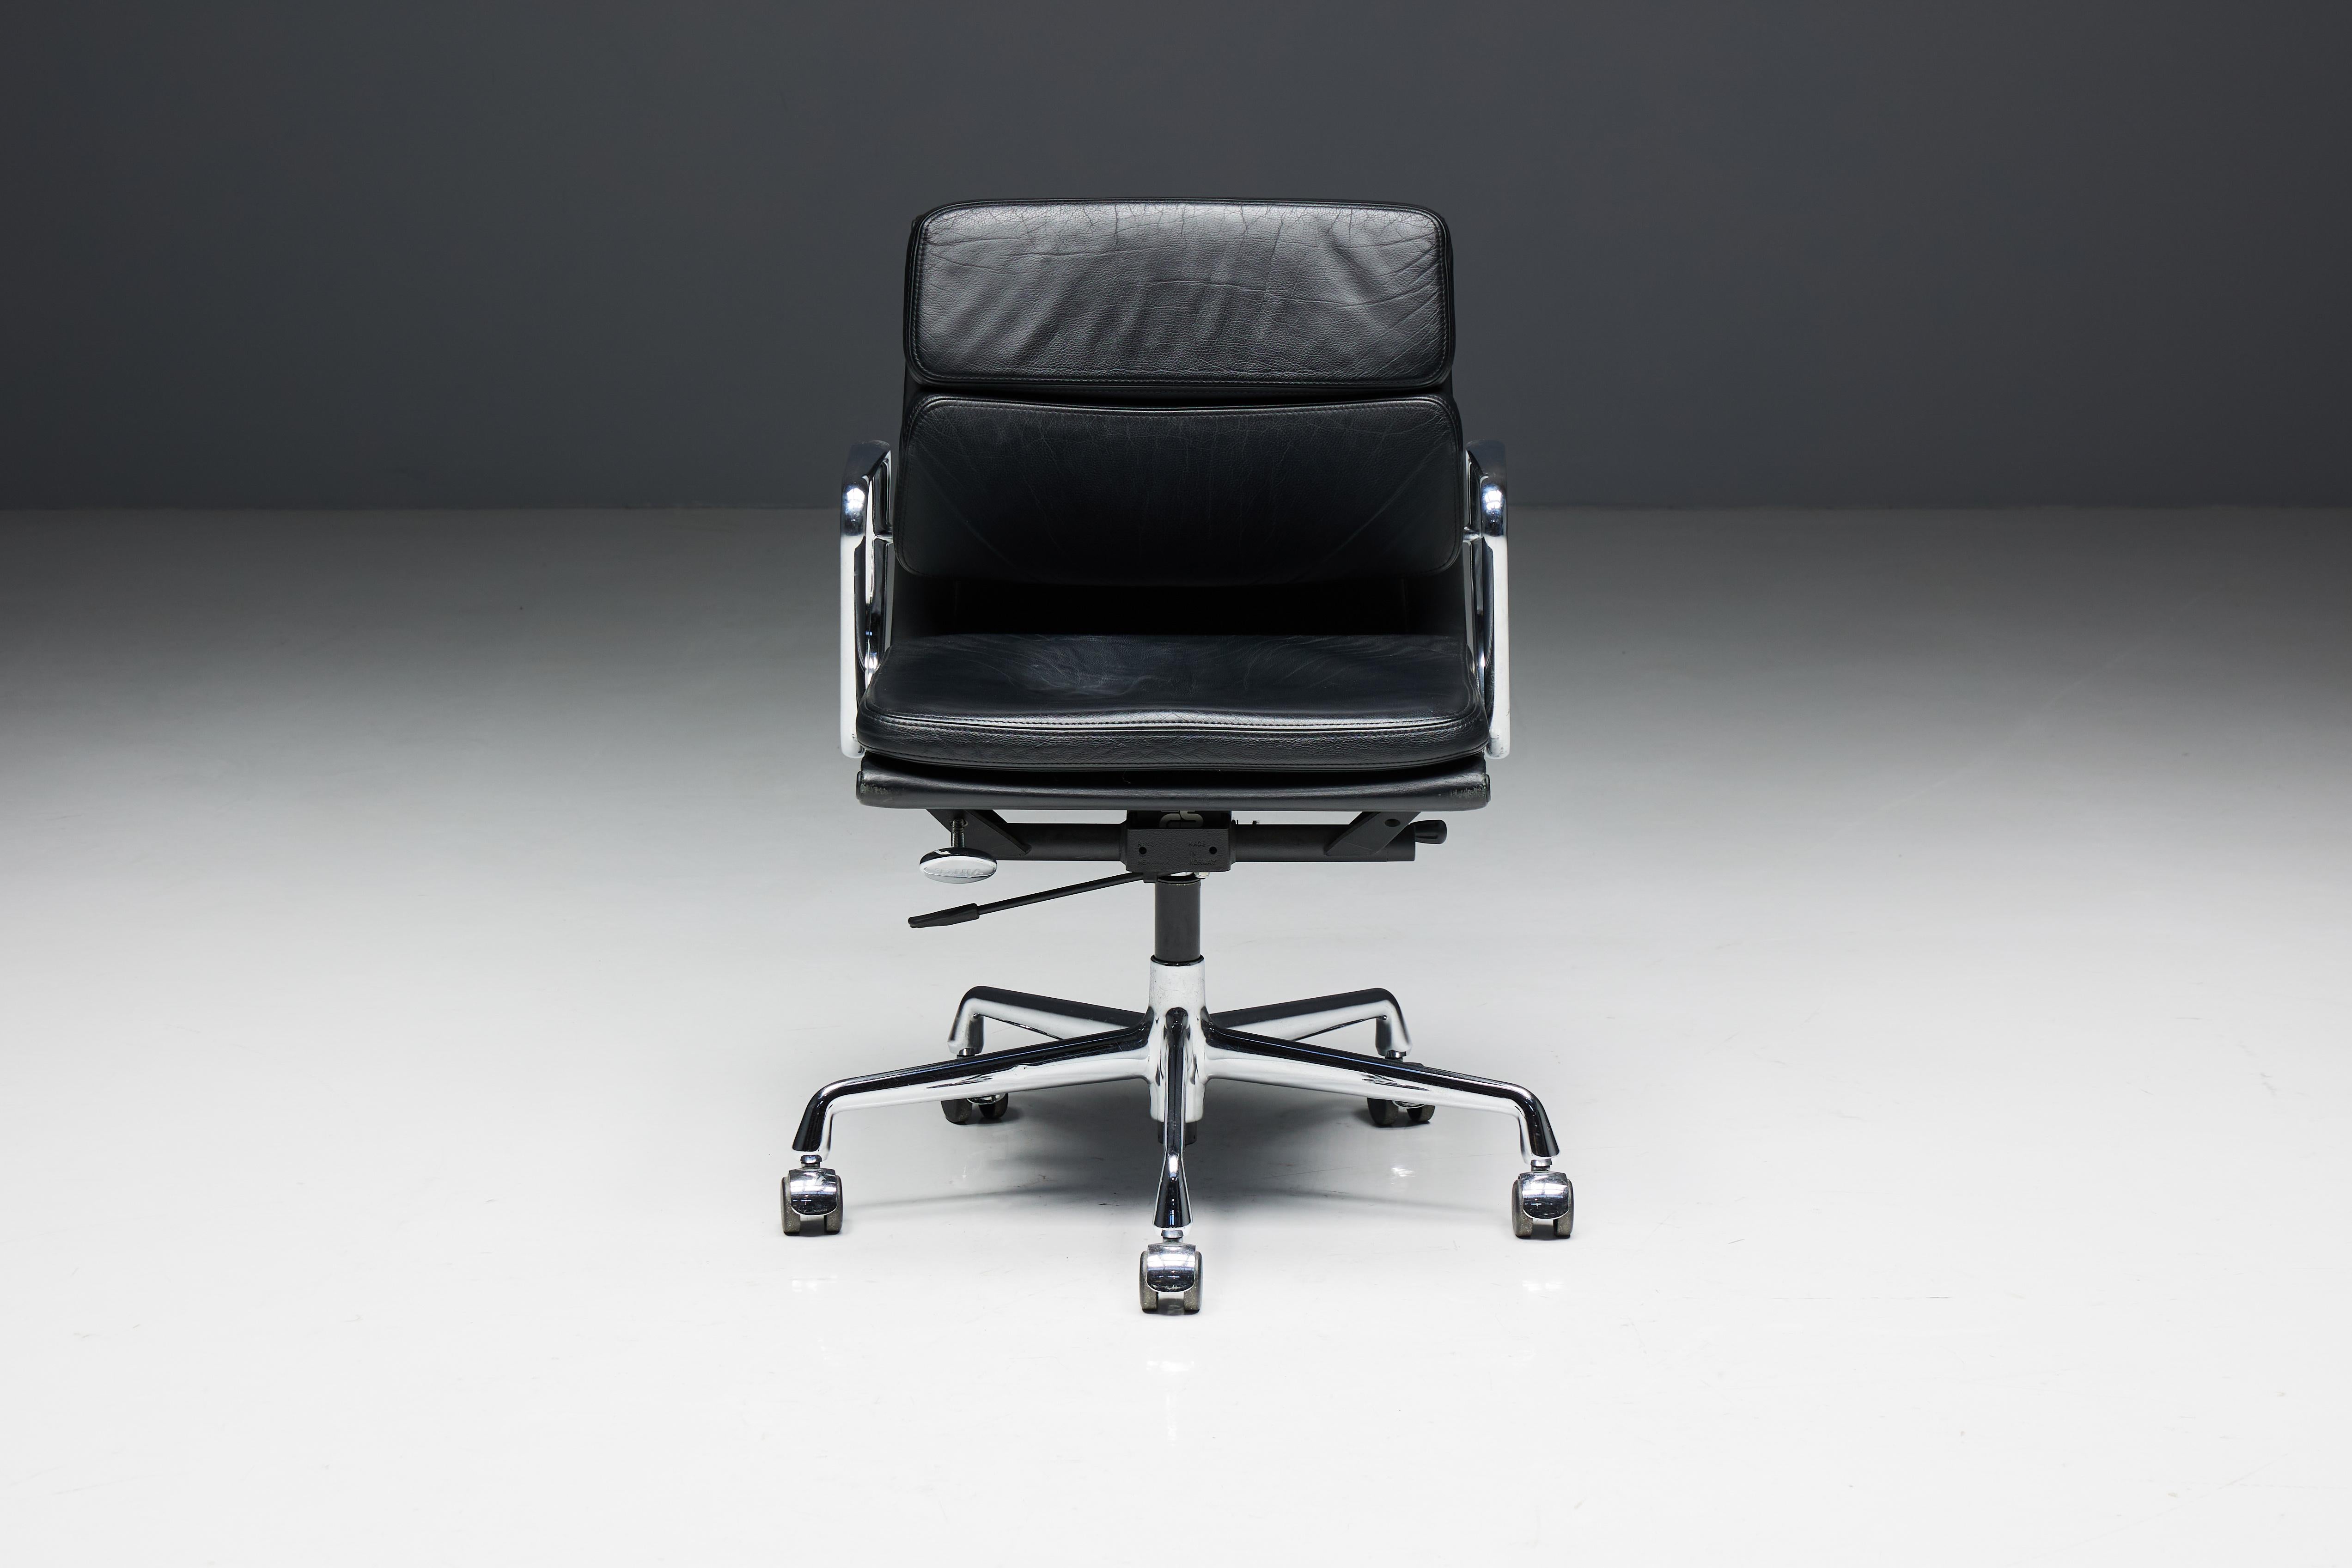 Charles and Ray Eames EA217 softpad office chair, produced by Vitra. This distinguished chair boasts a sleek black leather seat and backrest, complemented by a chrome frame and armrests for a timeless aesthetic. It features swivel, mobile,